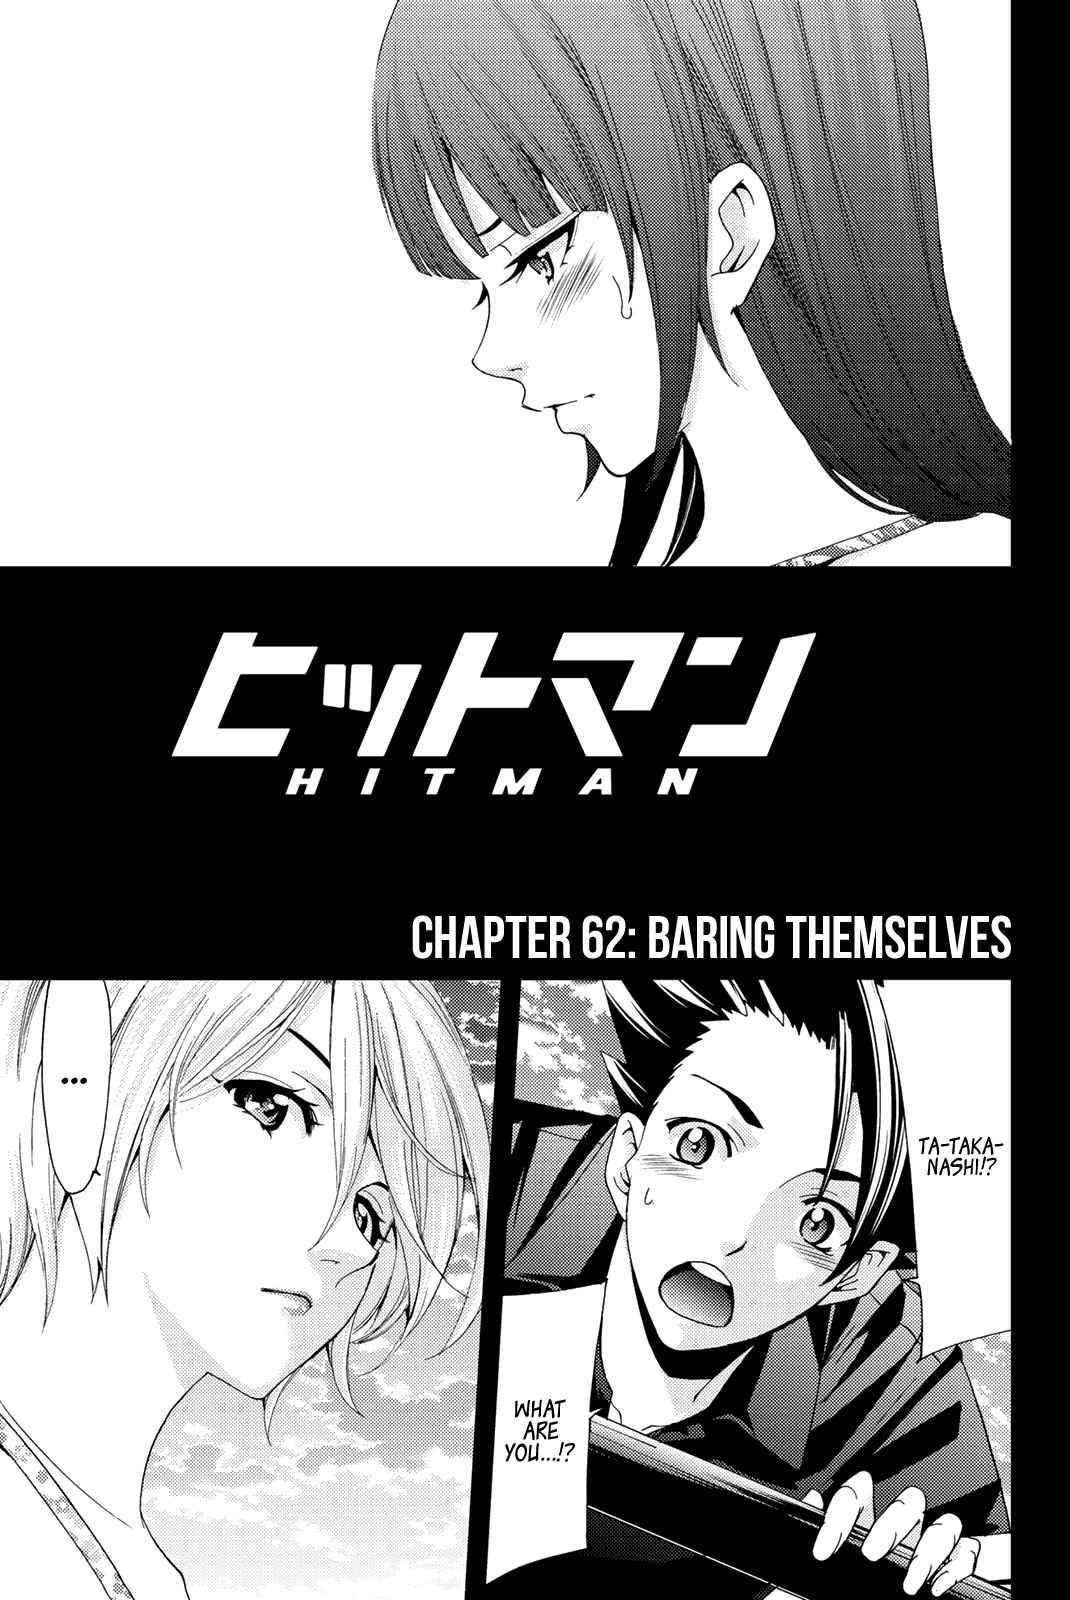 Hitman Ch. 62 Baring Themselves